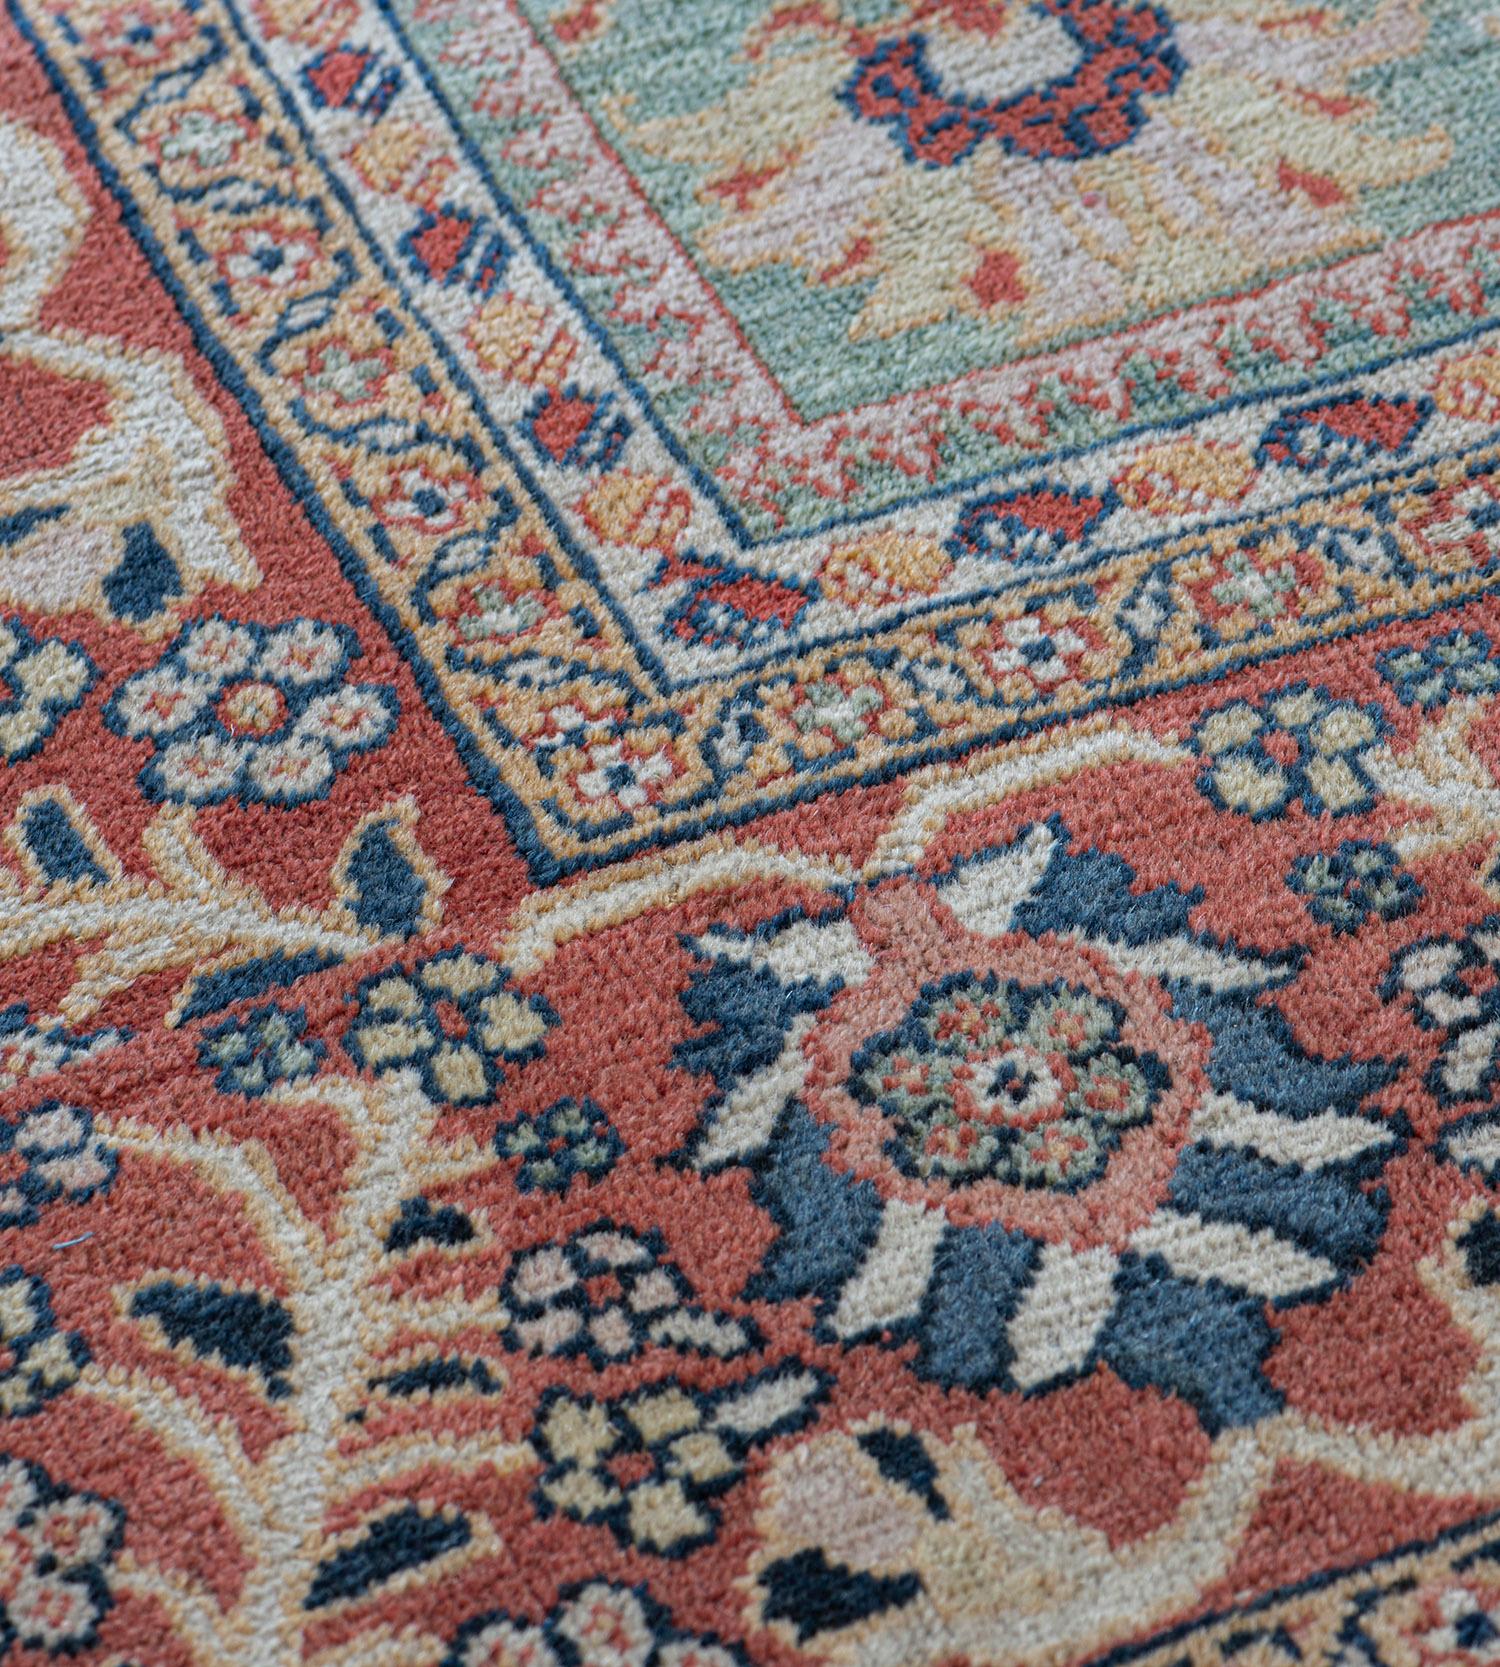 This traditional handwoven Persian Sultanabad rug has a shaded turquoise field with scattered floral motif issued by angled vines and stylized fanned palmettes, in a subtle raspberry-rust scrolling palmette border, between a profusion of floral and